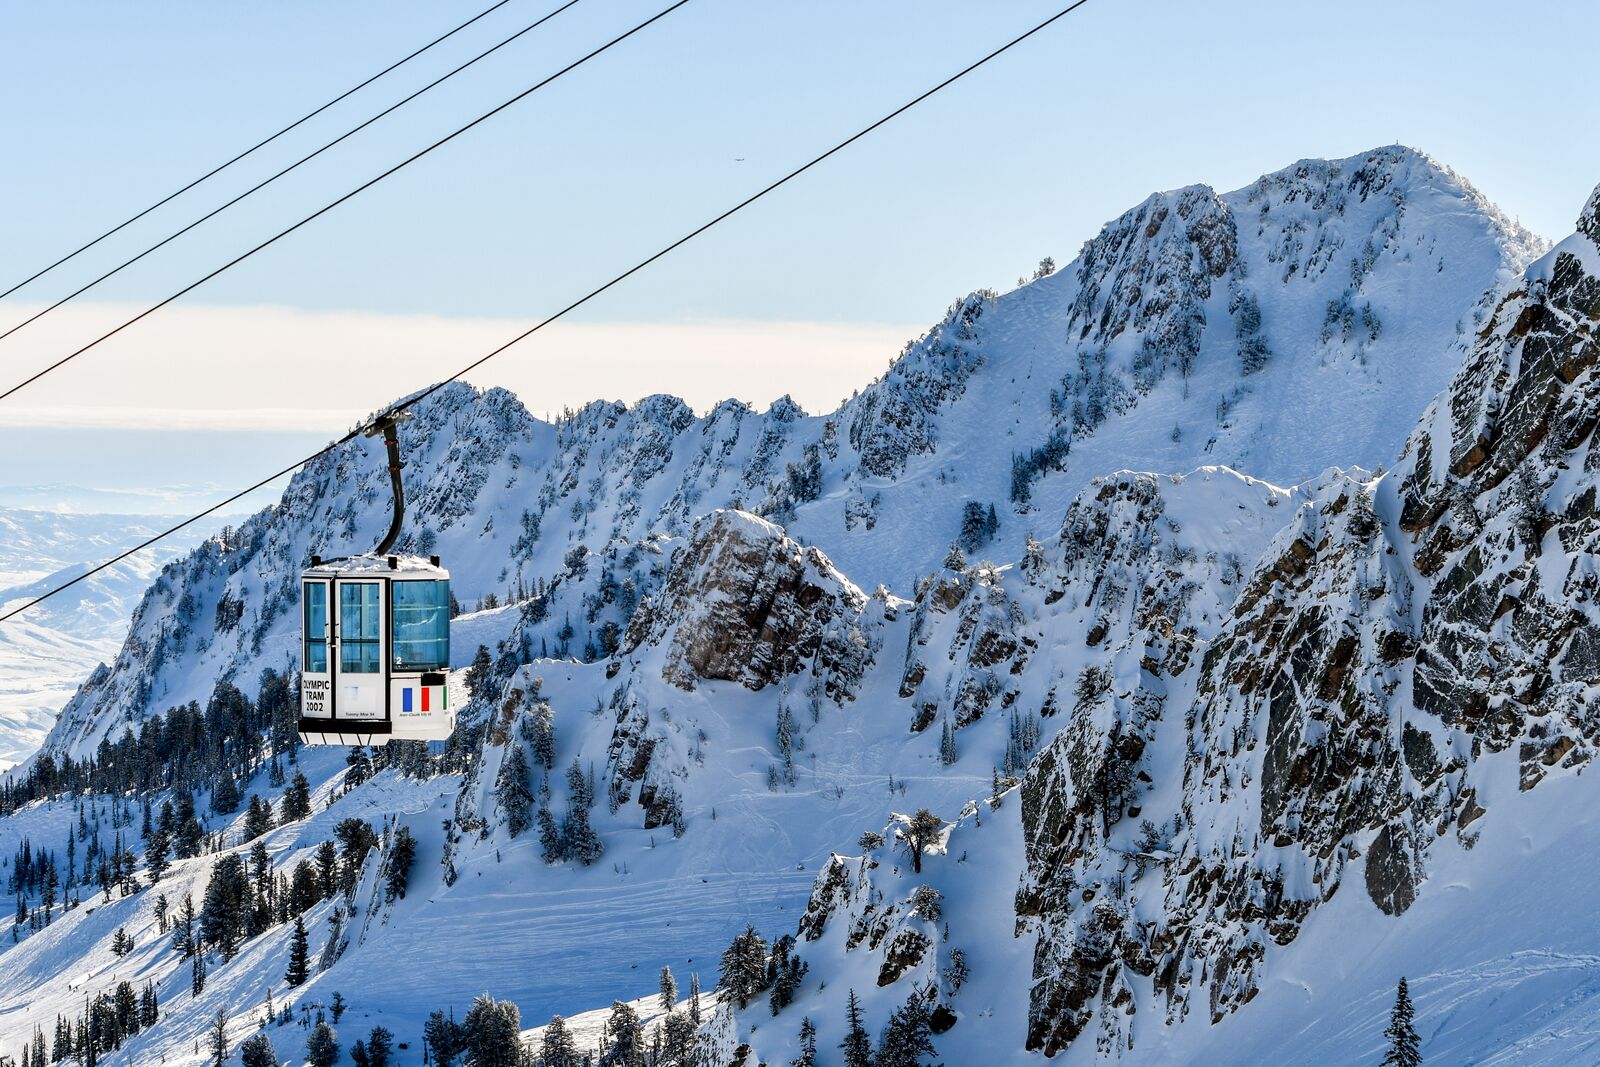 Snowbasin resort and a gondola, one of the best places for Salt Lake City skiing